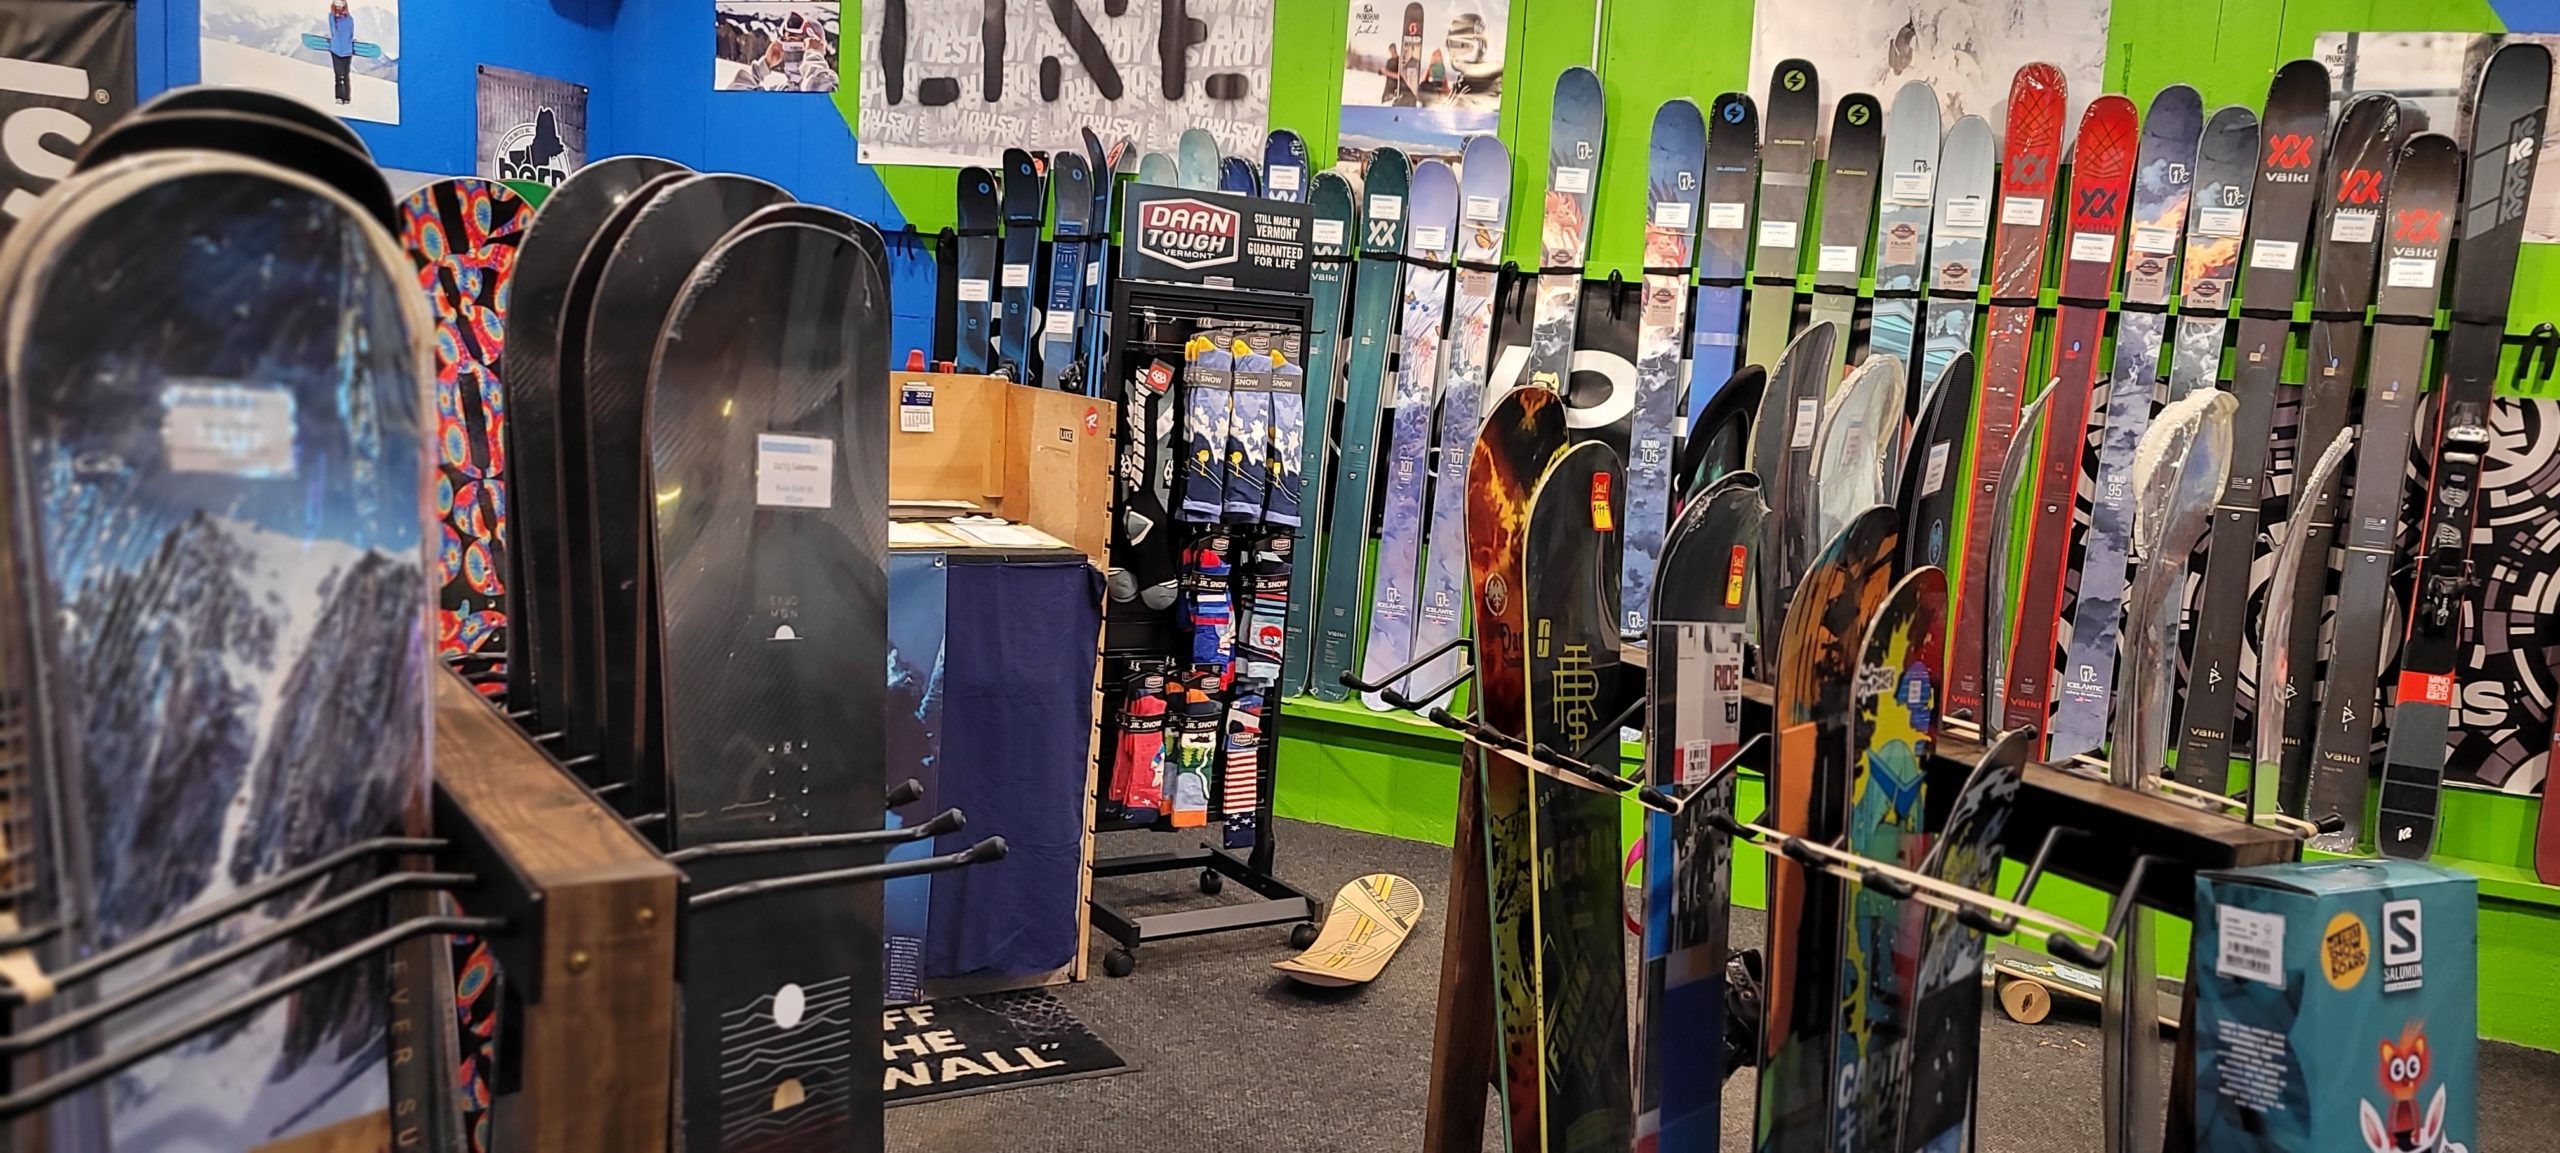 Skis and snowboards